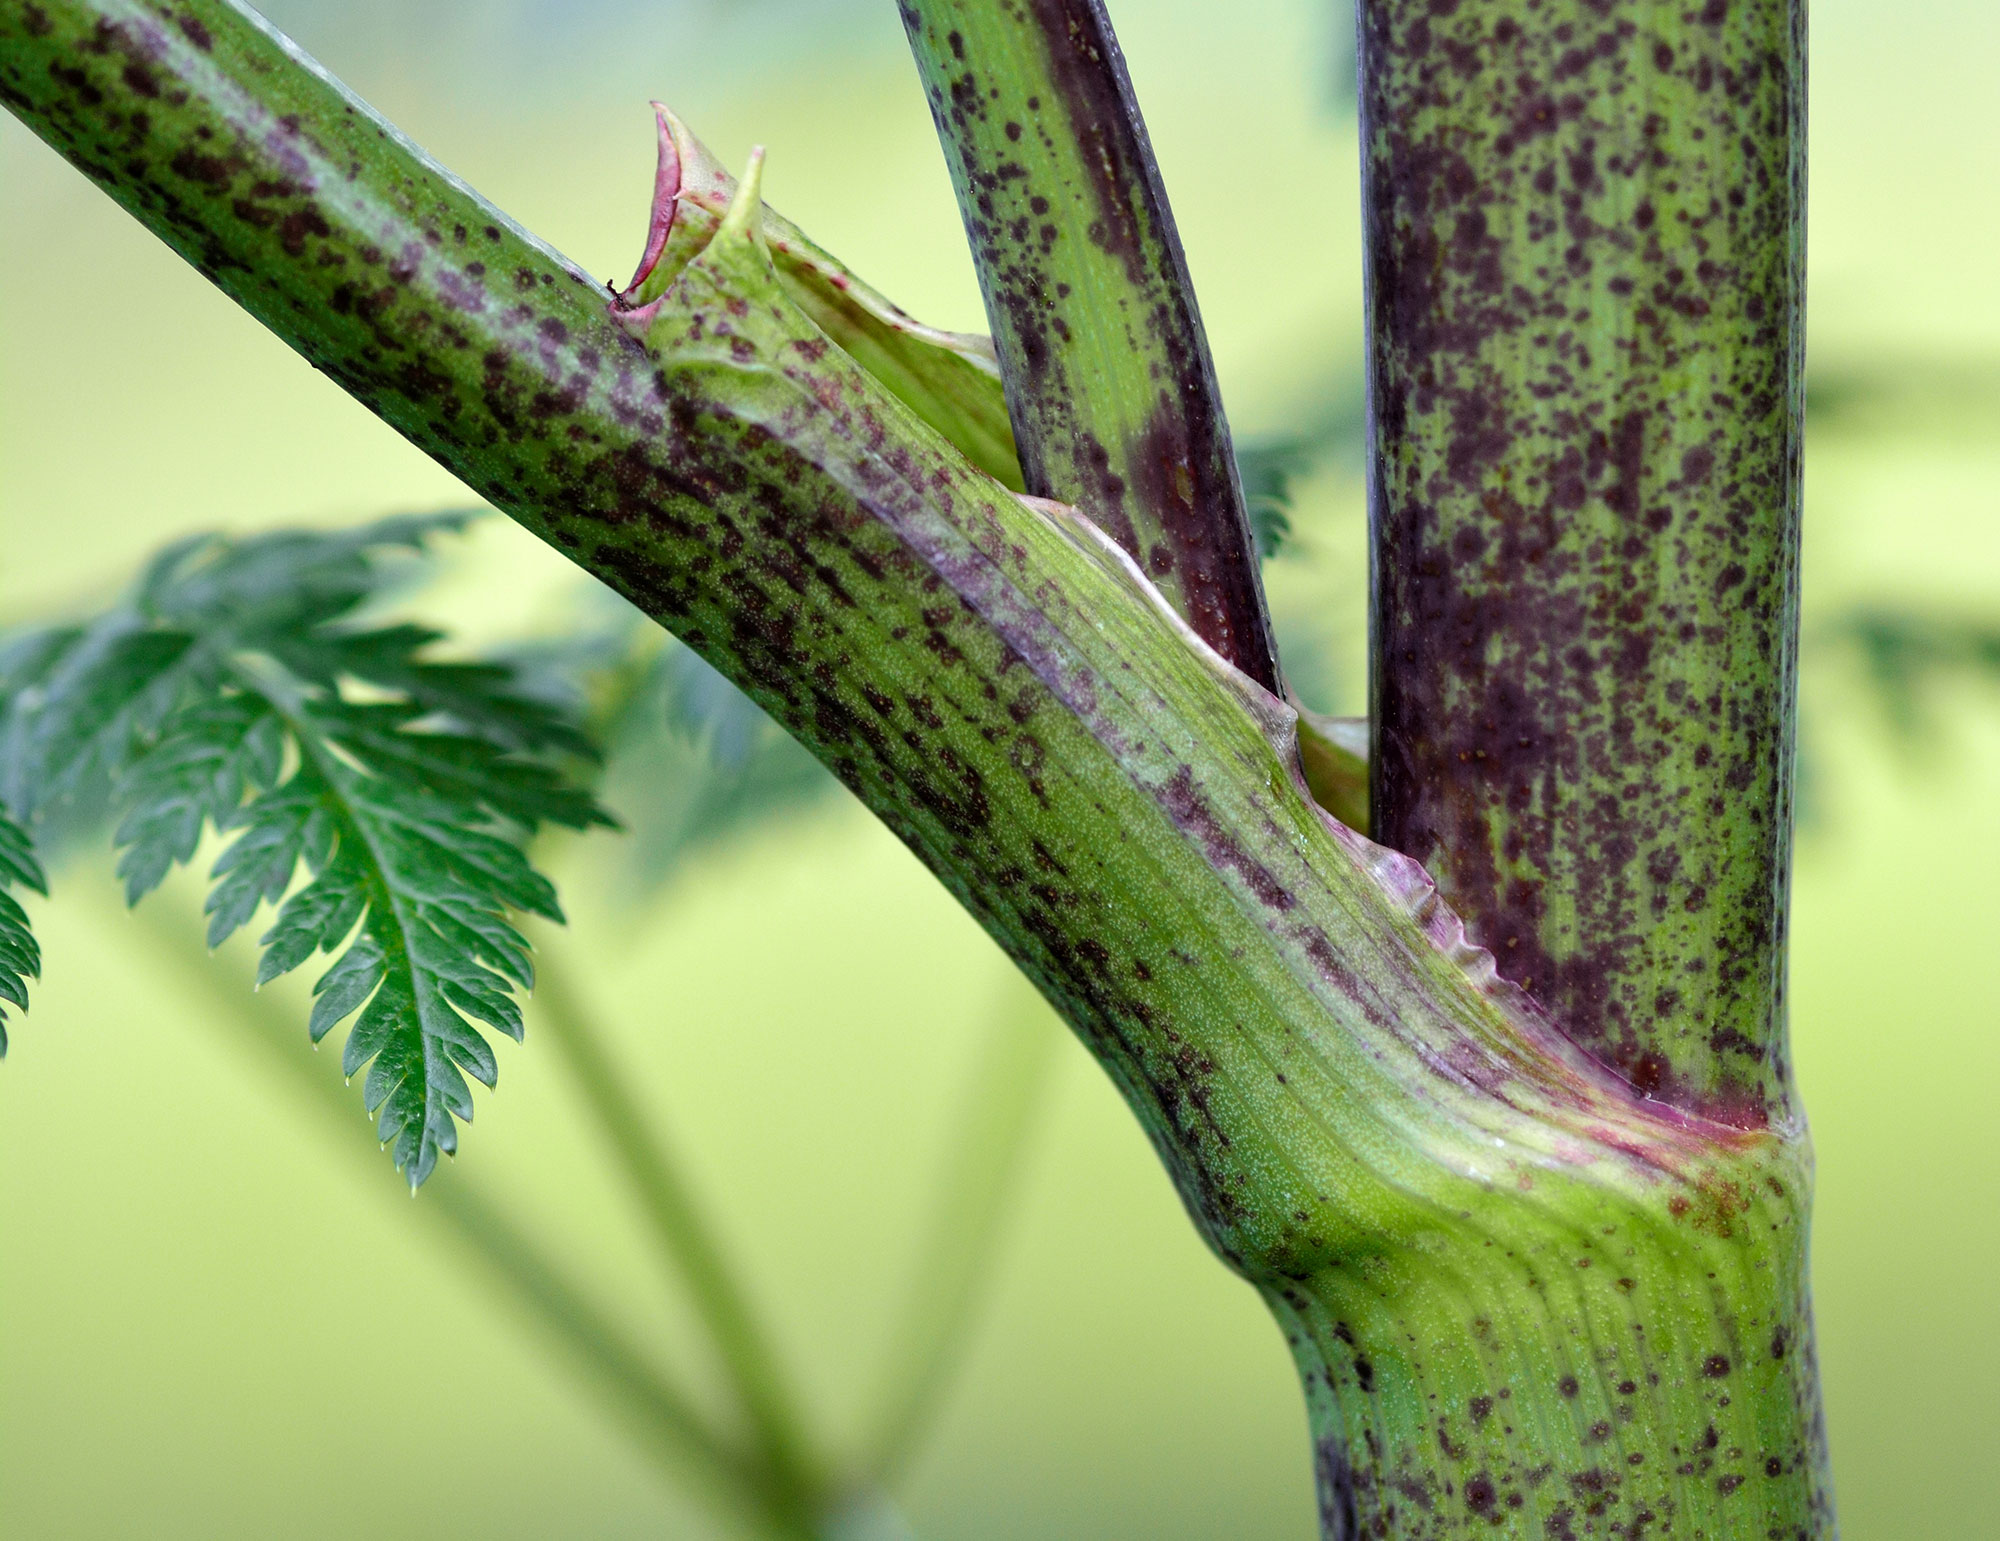 Closeup of poison hemlock's stem showing the purple spots and blotches.